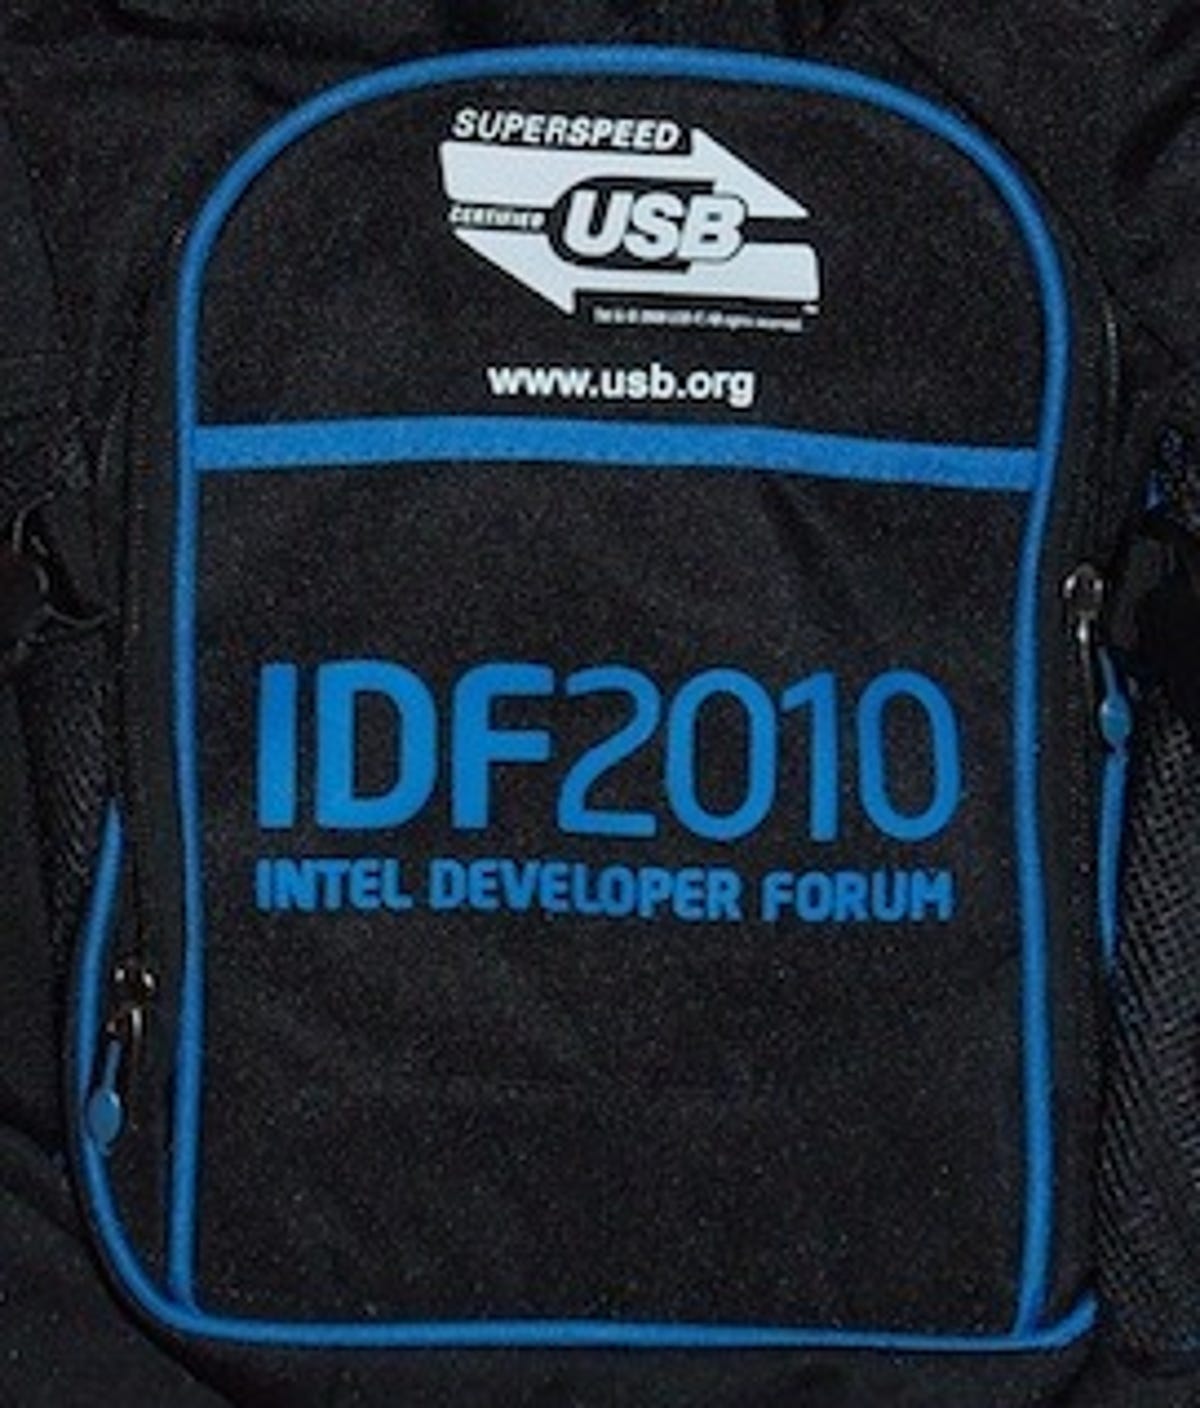 Ironically, USB 3.0 was promoted prominently on Intel Developer Forum bags last week. Ironic because Intel has yet to support the standard in its chipsets.